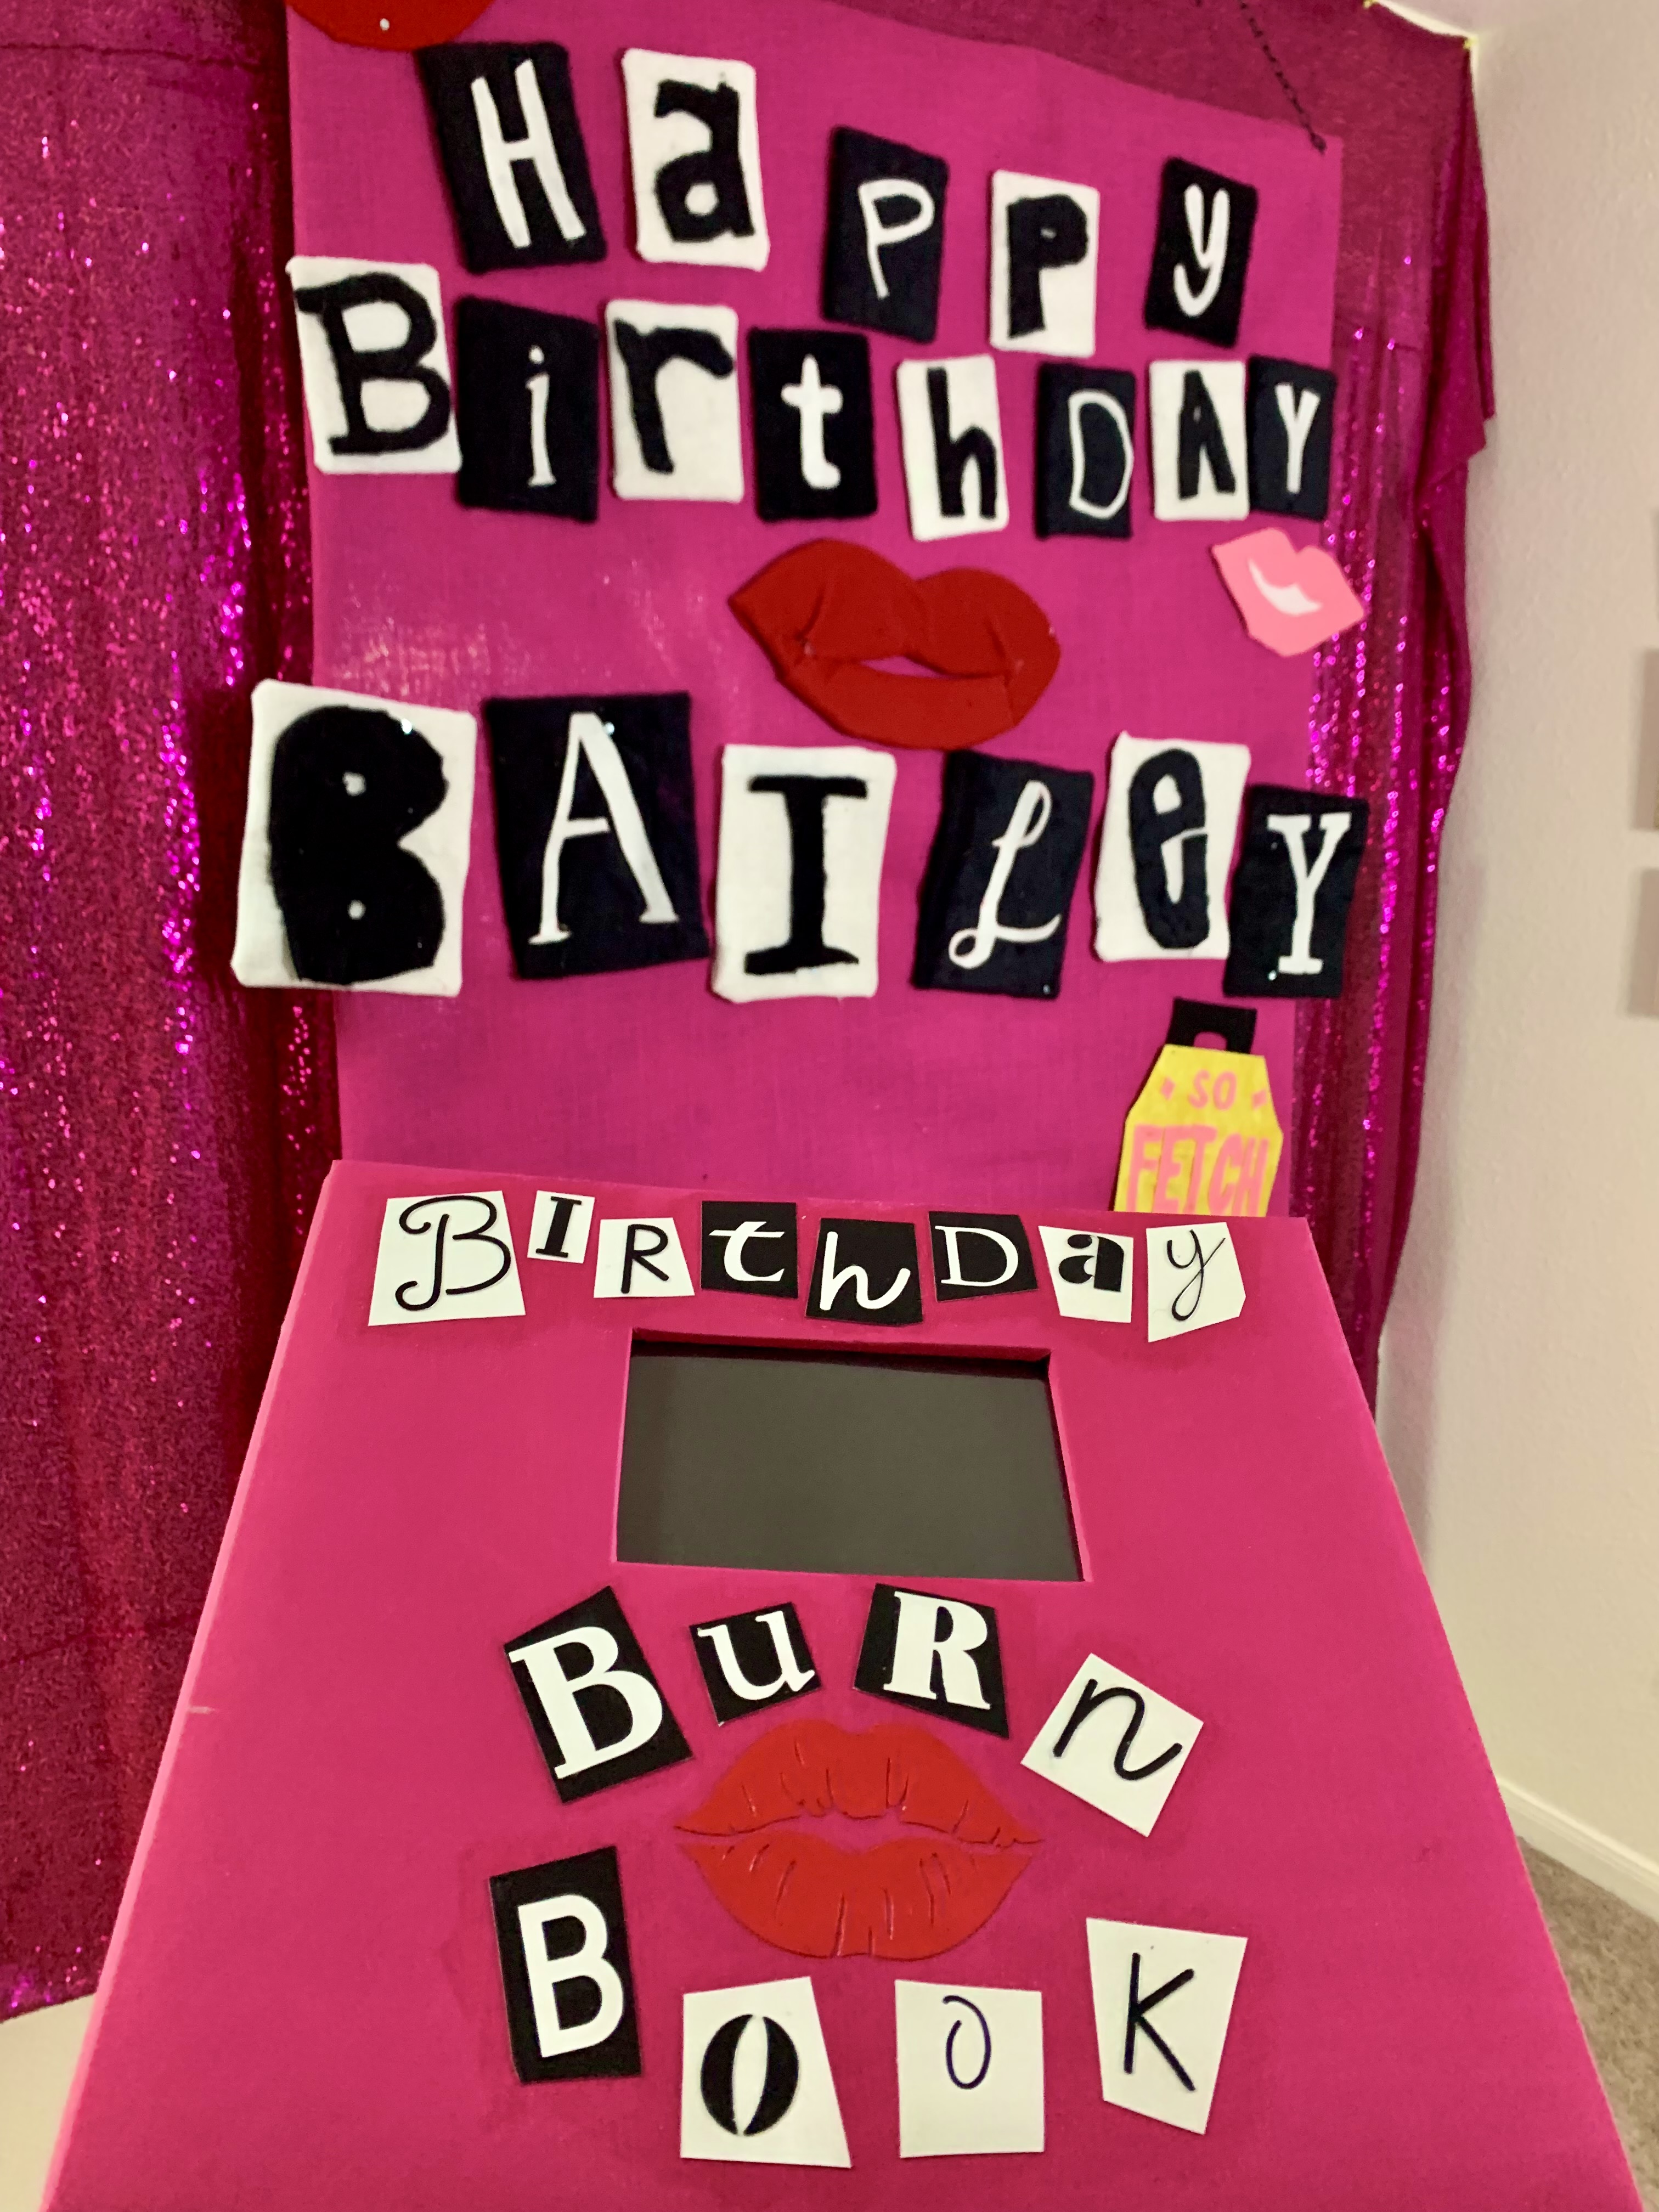 Mean girls party theme  Mean girls party, Girl bday party, Teen girl  birthday party